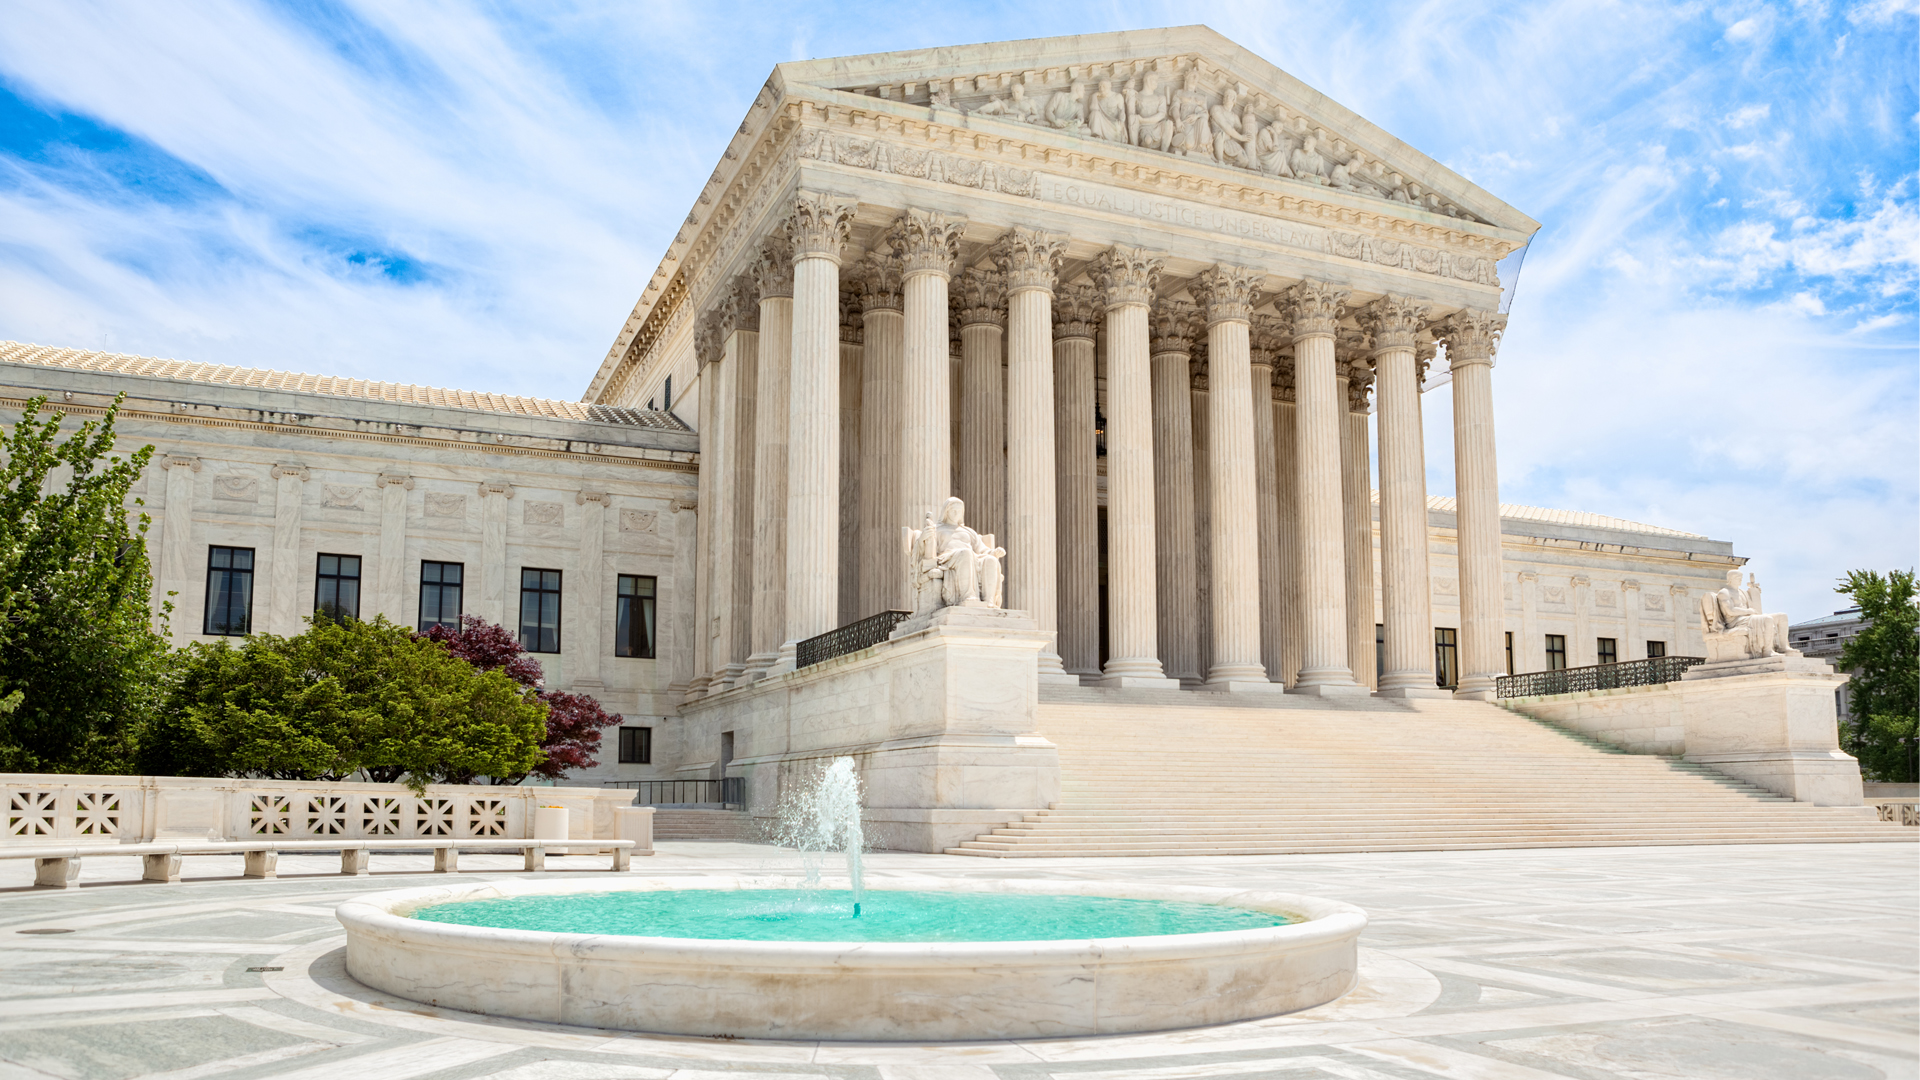 “Chevron is Overruled” Supreme Court decision upends the era of agency rule